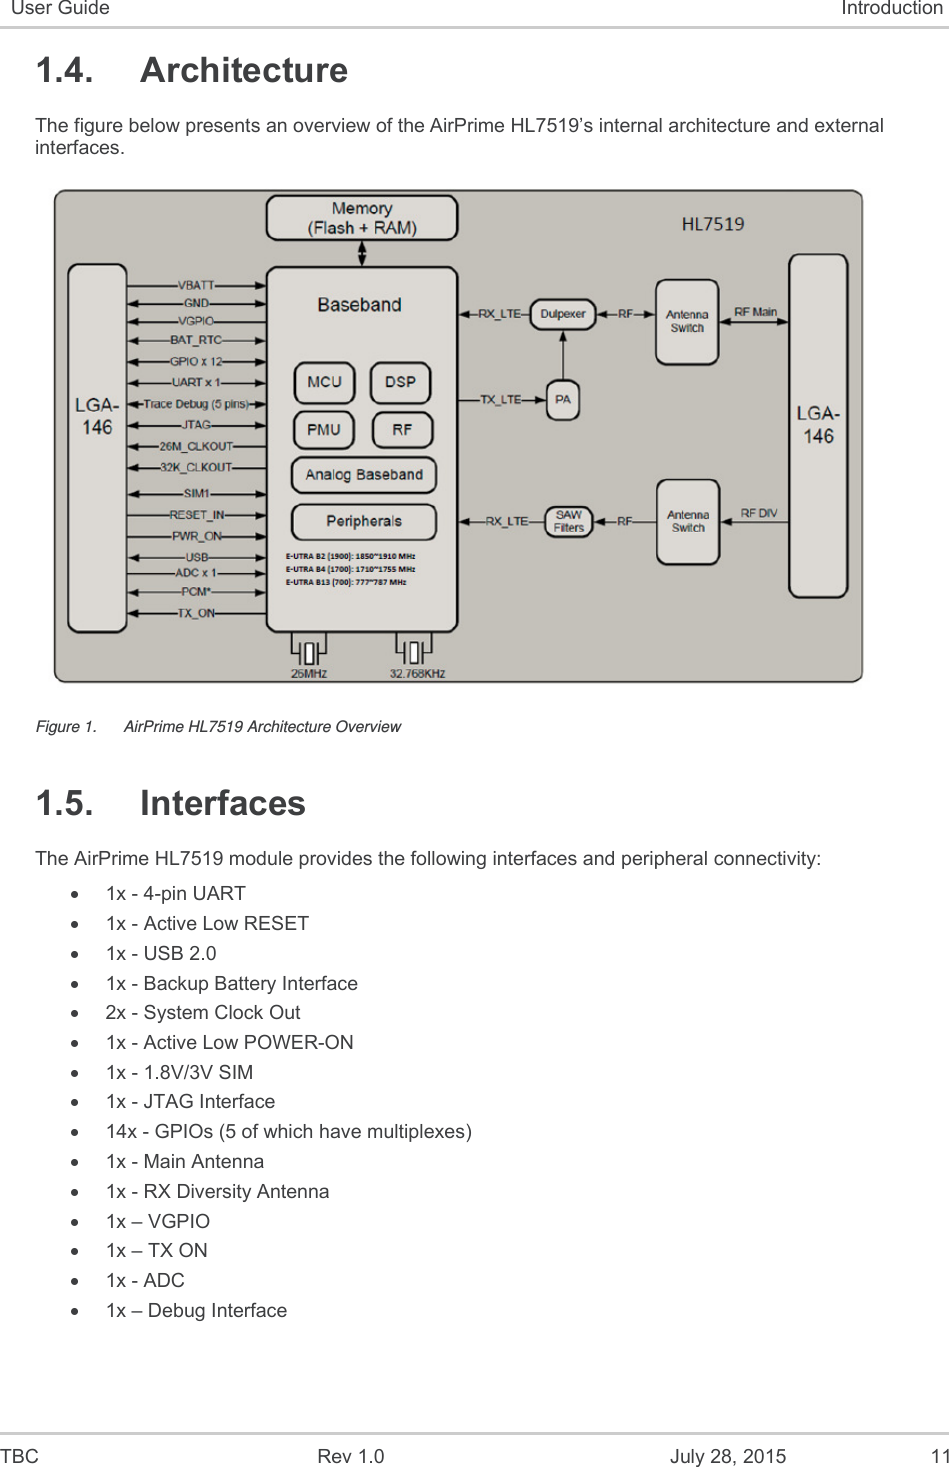  TBC  Rev 1.0  July 28, 2015  11 User Guide  Introduction 1.4.  Architecture The figure below presents an overview of the AirPrime HL7519’s internal architecture and external interfaces.    Figure 1.  AirPrime HL7519 Architecture Overview 1.5.  Interfaces The AirPrime HL7519 module provides the following interfaces and peripheral connectivity:   1x - 4-pin UART   1x - Active Low RESET   1x - USB 2.0   1x - Backup Battery Interface   2x - System Clock Out   1x - Active Low POWER-ON   1x - 1.8V/3V SIM   1x - JTAG Interface    14x - GPIOs (5 of which have multiplexes)   1x - Main Antenna   1x - RX Diversity Antenna  1x – VGPIO  1x – TX ON   1x - ADC   1x – Debug Interface 